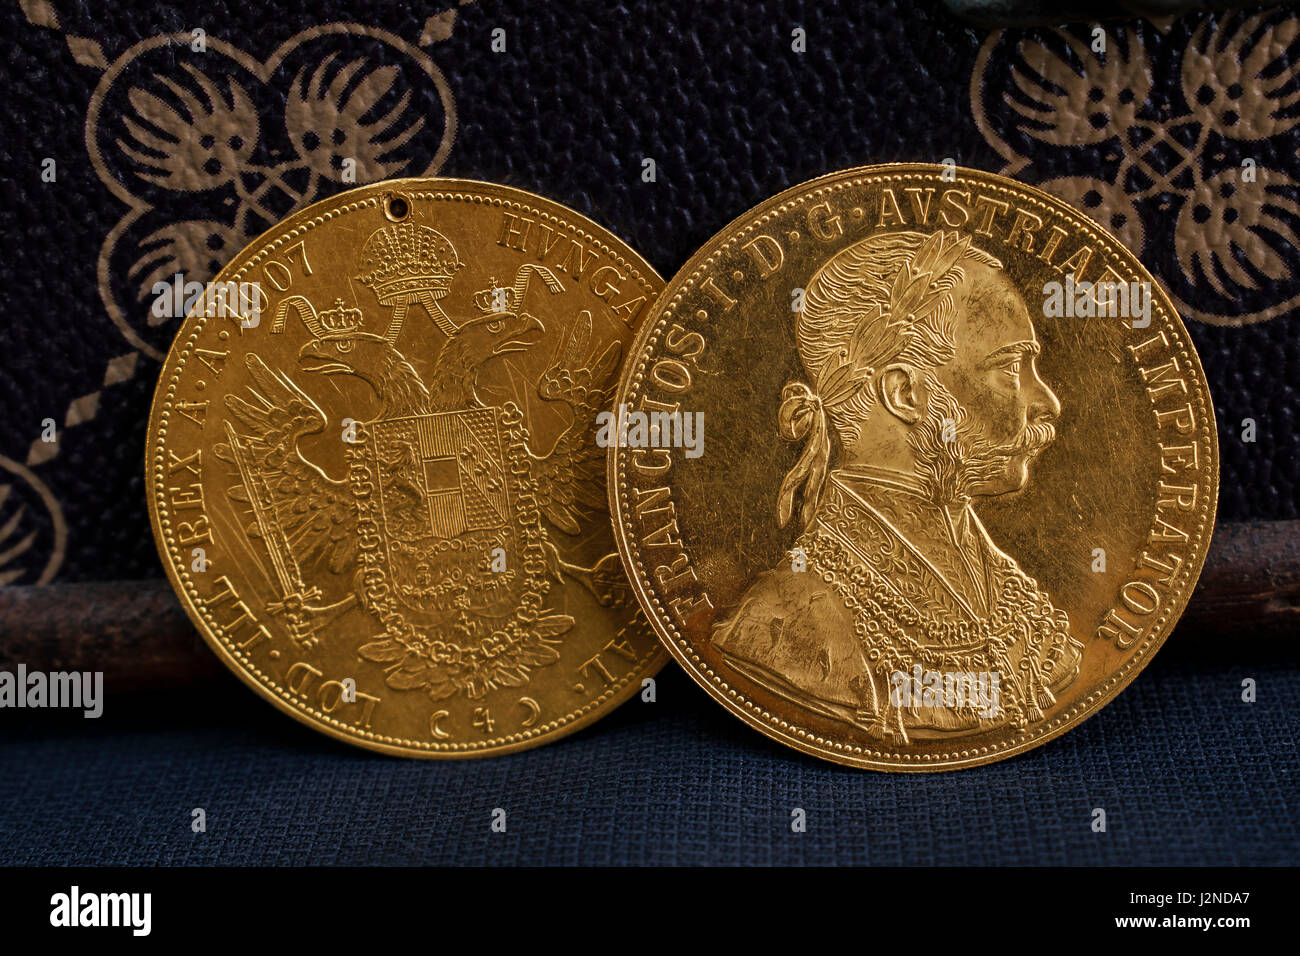 Close-up view of two on one another Austria-Hungary thalers, avers and revers of golden coin-ducats from 1915 with Kaiser Franz Joseph I Stock Photo